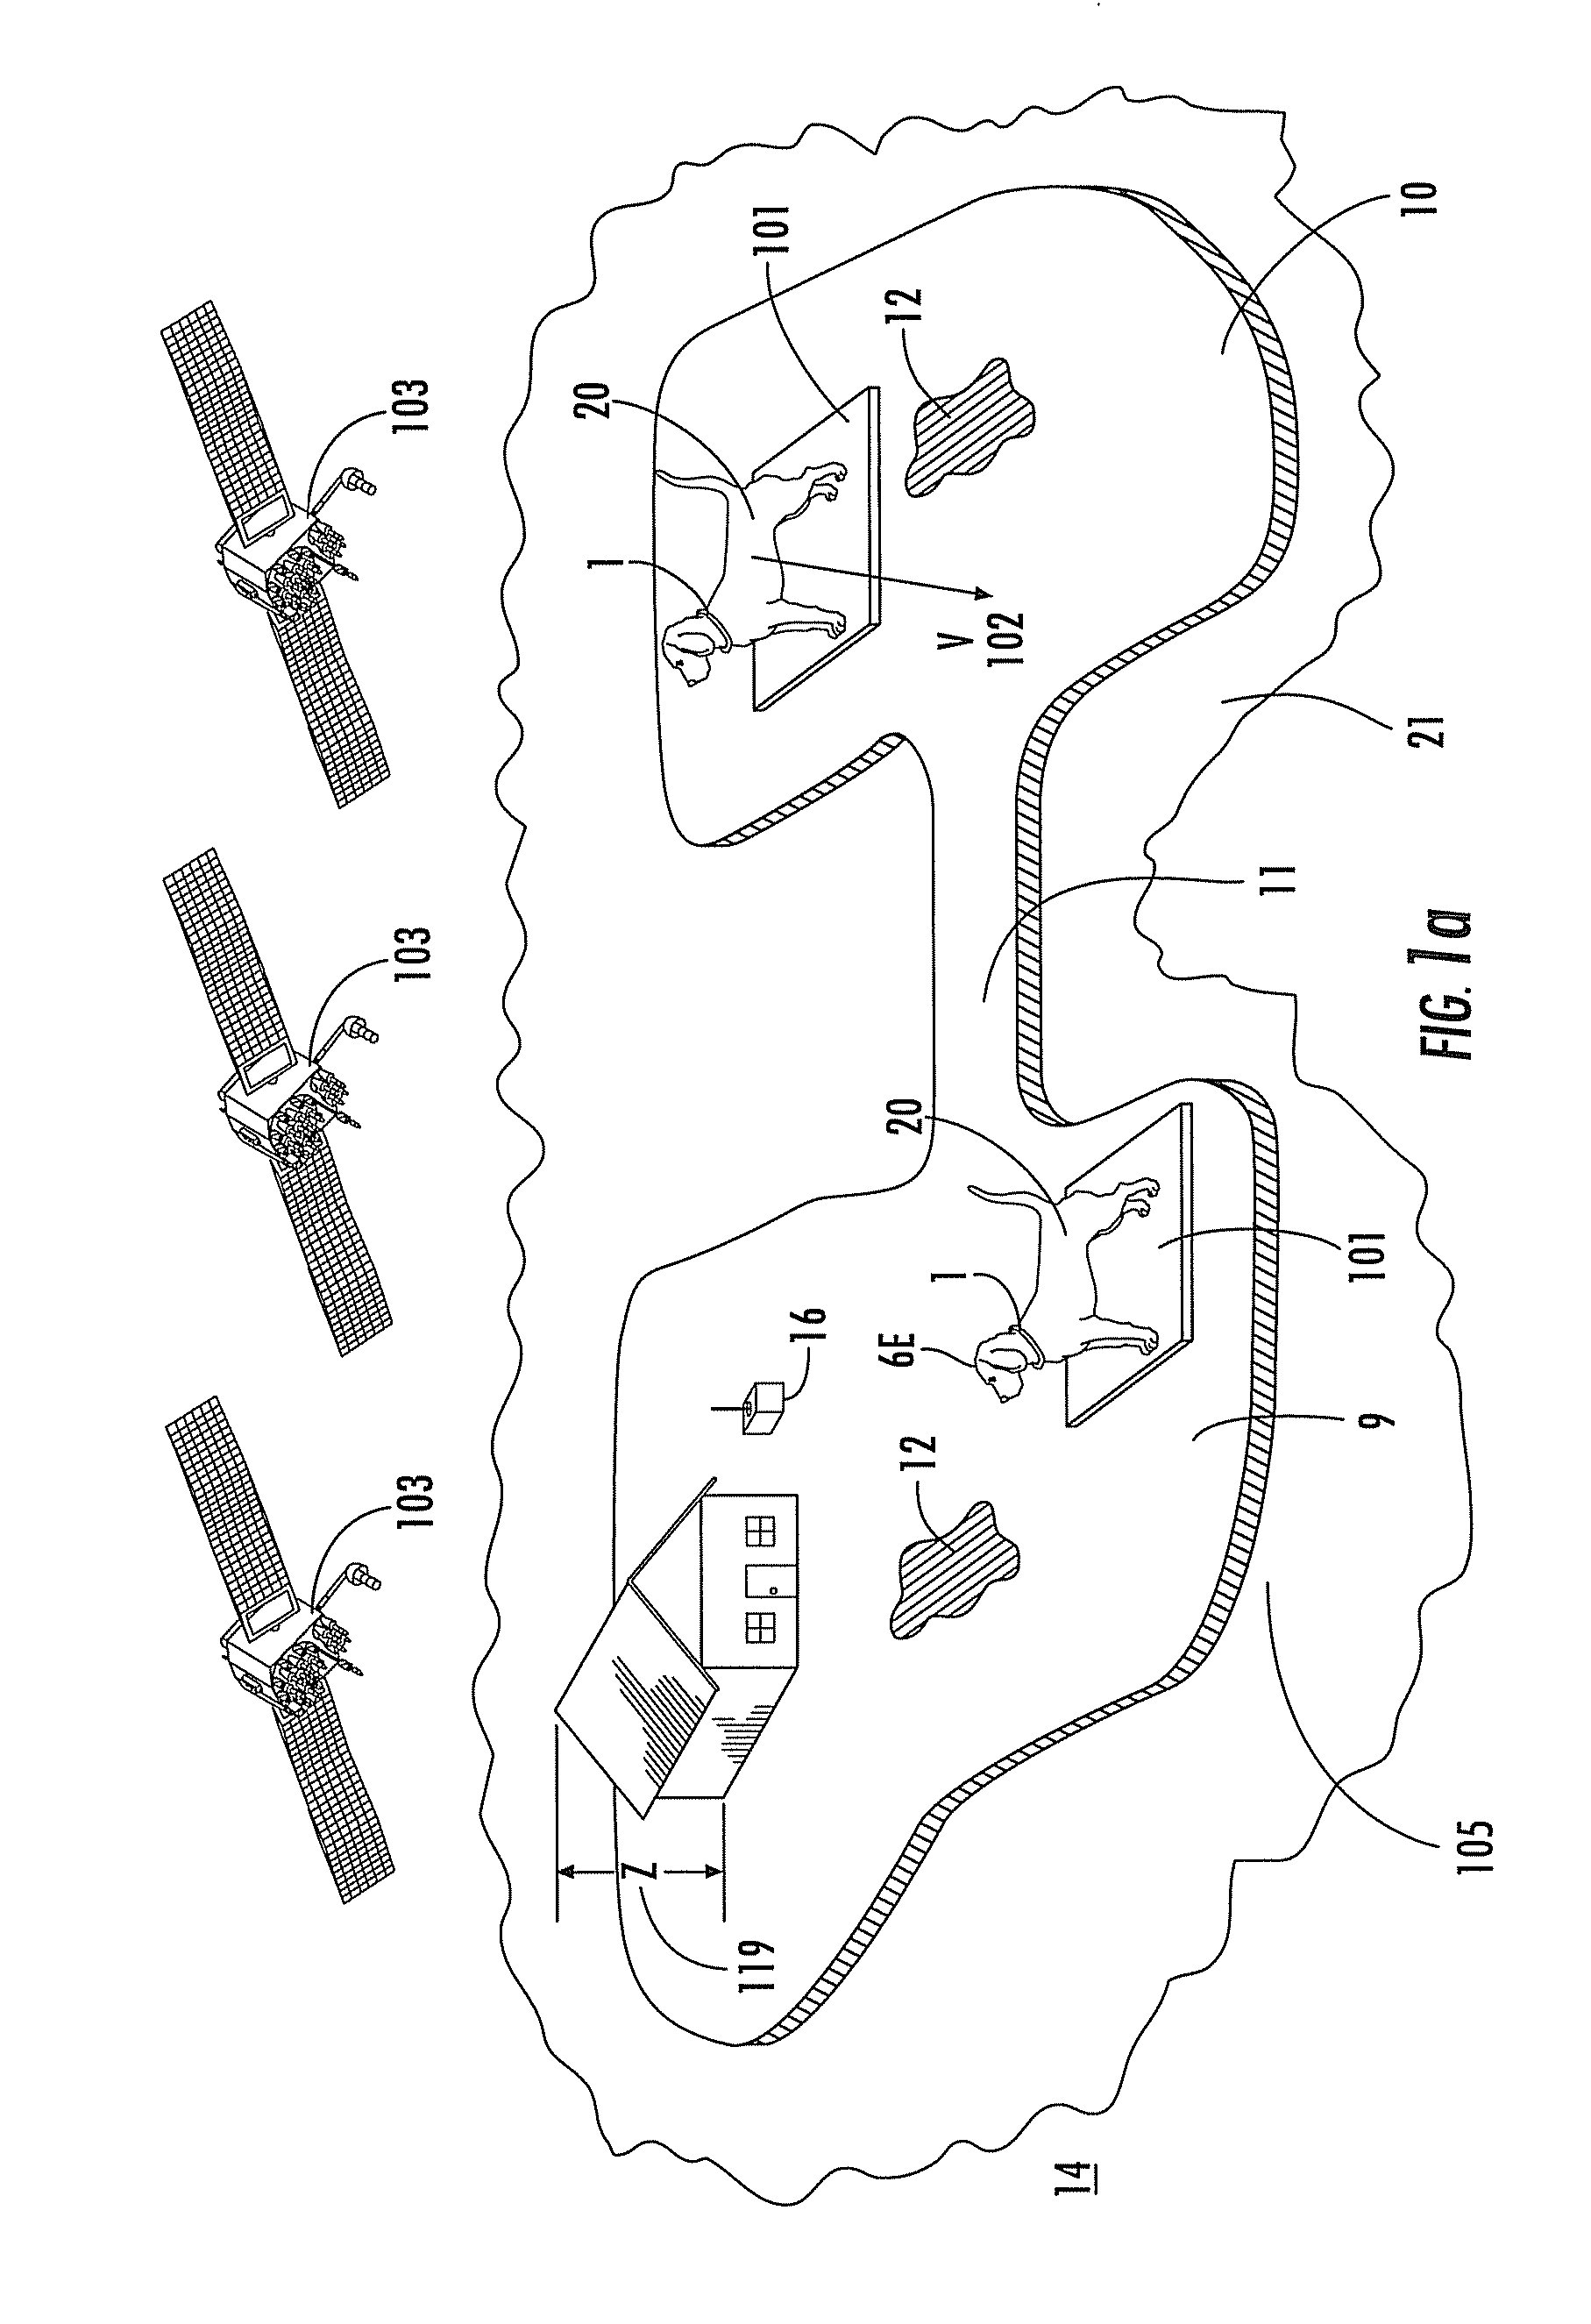 Large area position/proximity correction device with alarms using (d)gps technology